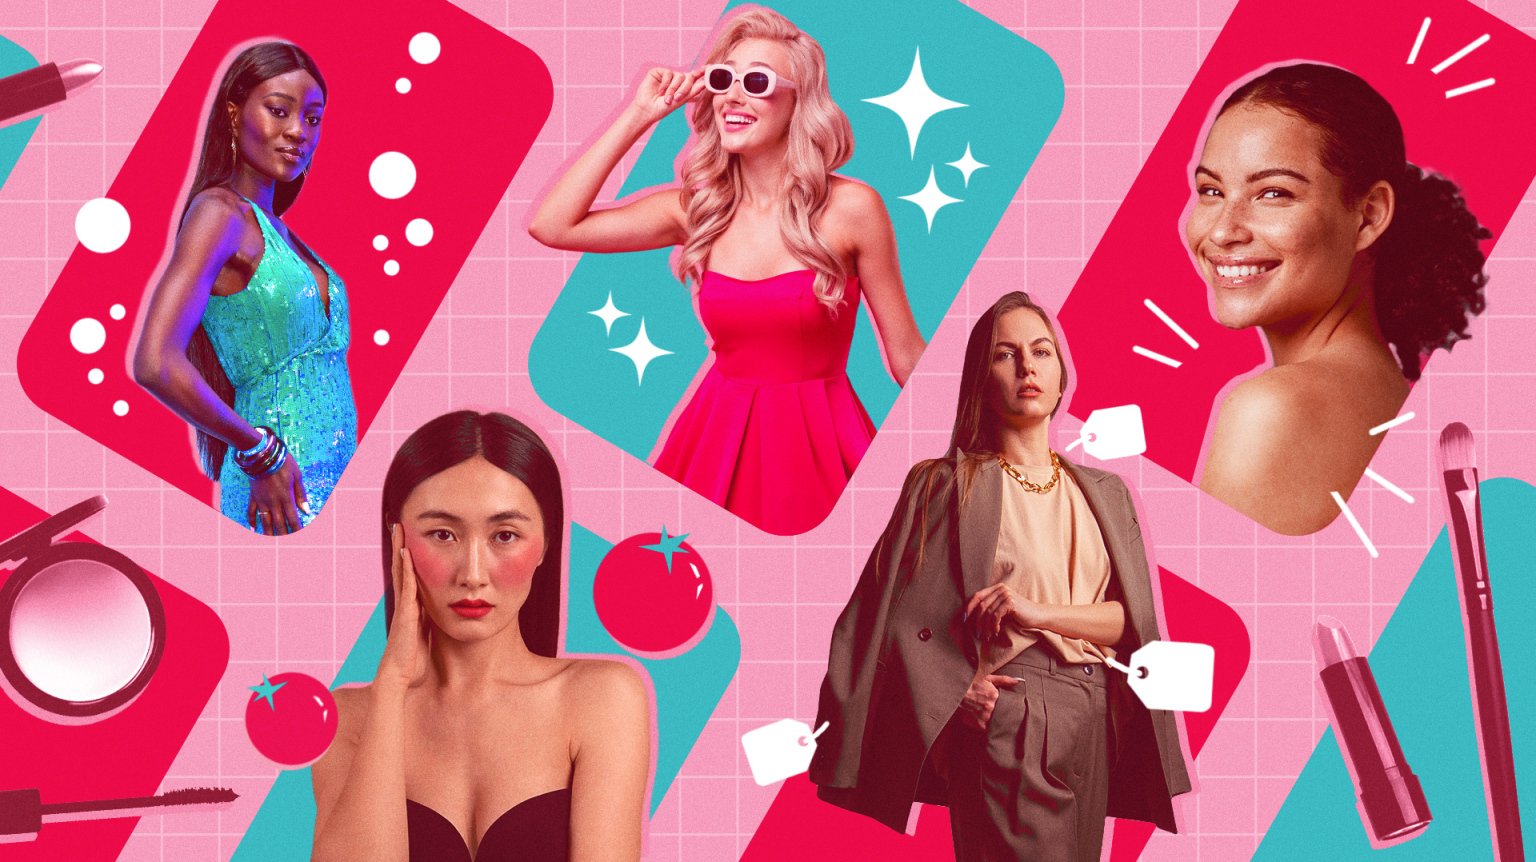 A collage of various people displaying TikTok aesthetics, with a pink background and beauty products on the side.